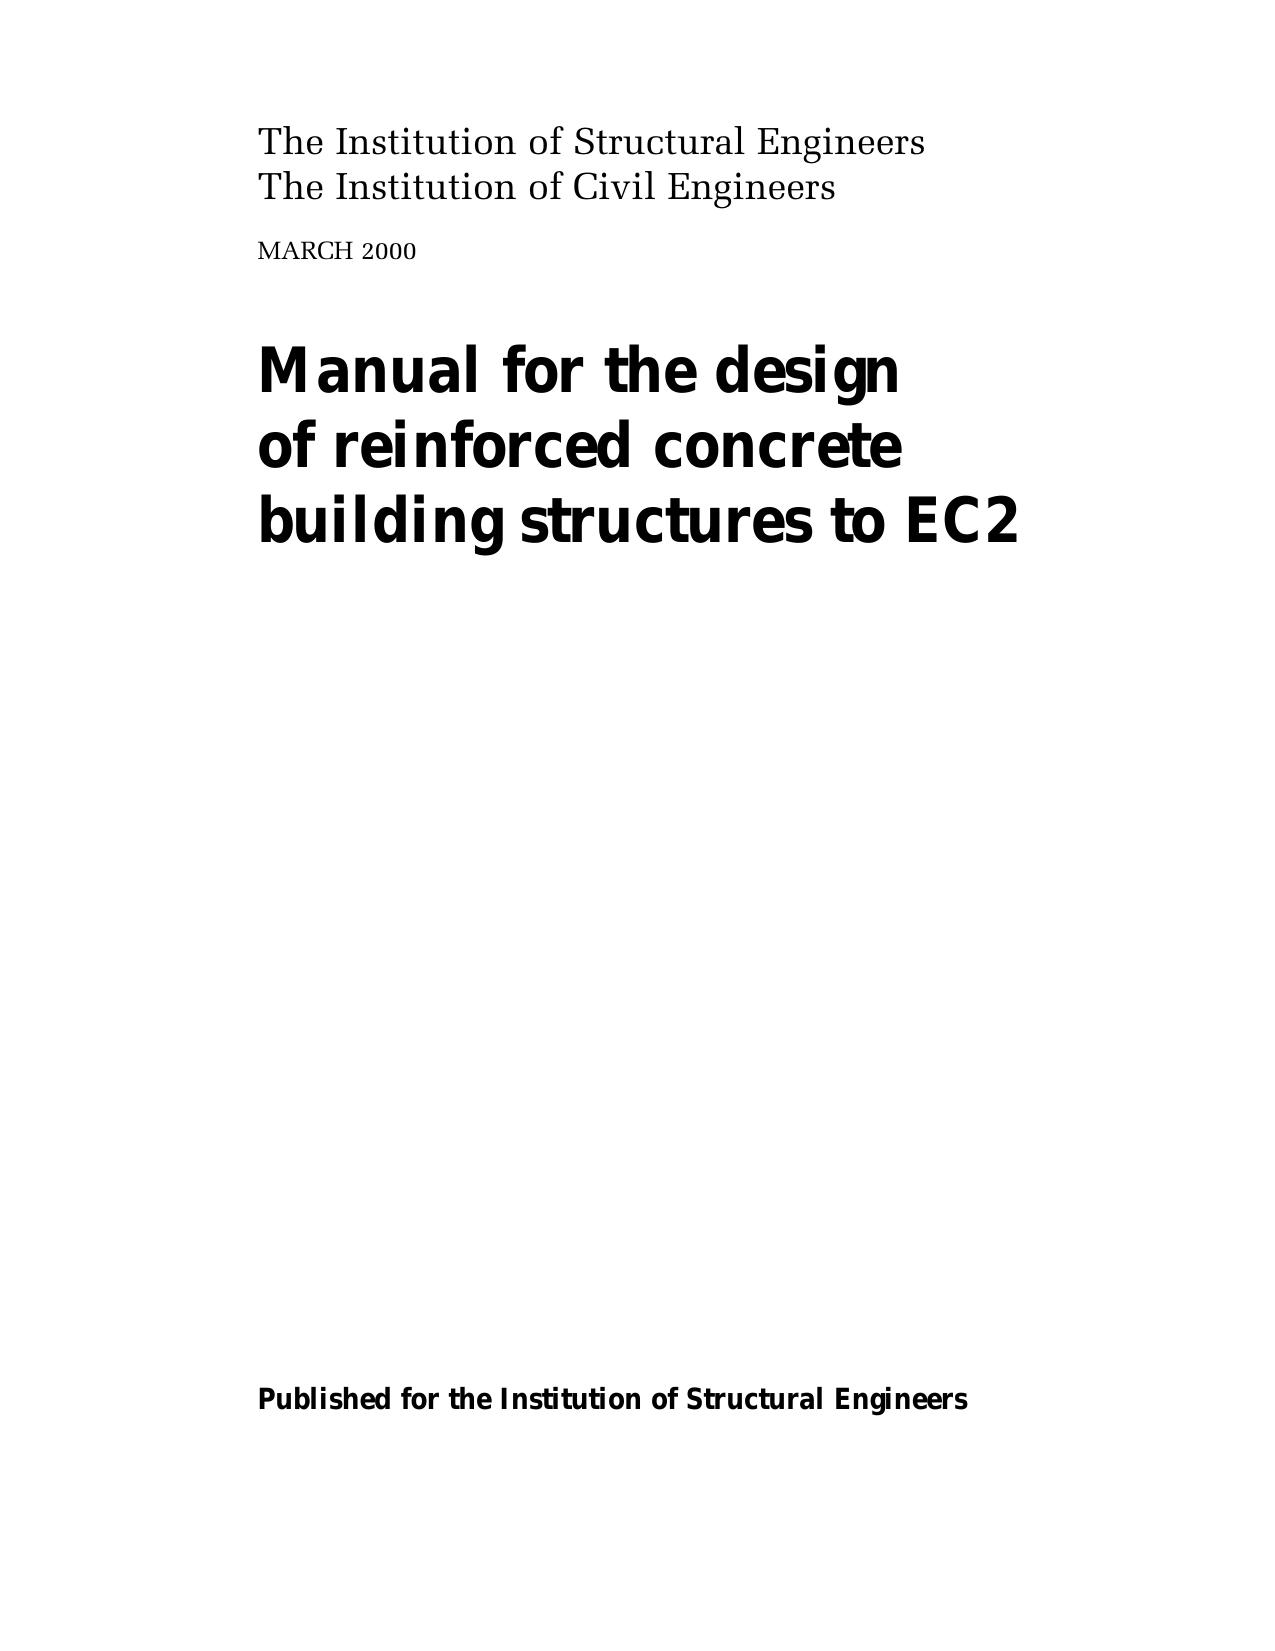 Manual for design of reinforced concrete building structures to EC2